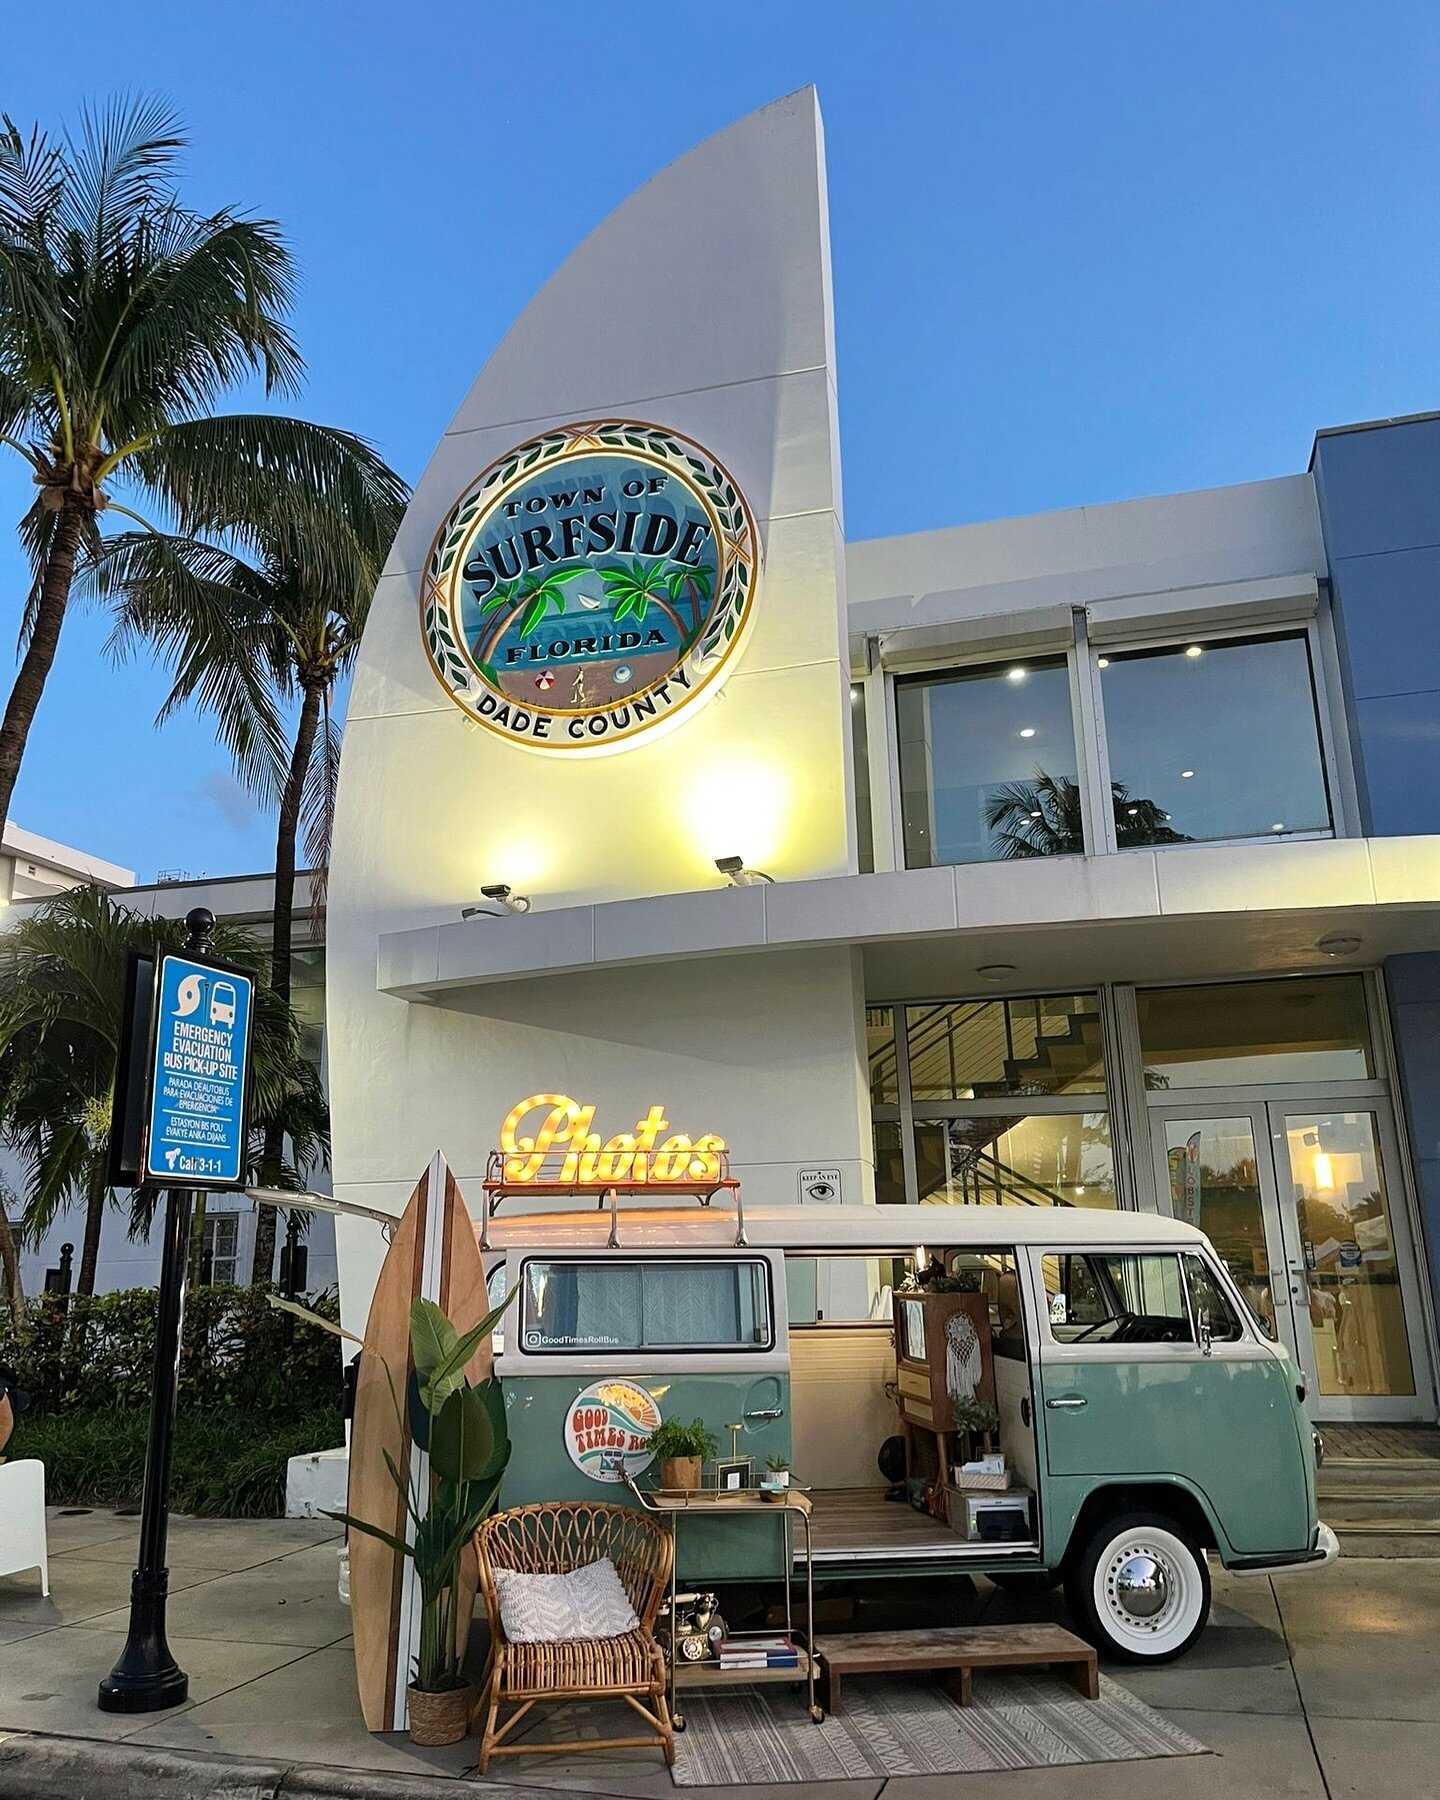 Surf Food Fest in Surfside, FL did not disappoint! We can&rsquo;t wait for the next one 🏄&zwj;♂️
#photobooth #surfside #florida #floridalife #foodfestival #vw #vwbus #volkswagen